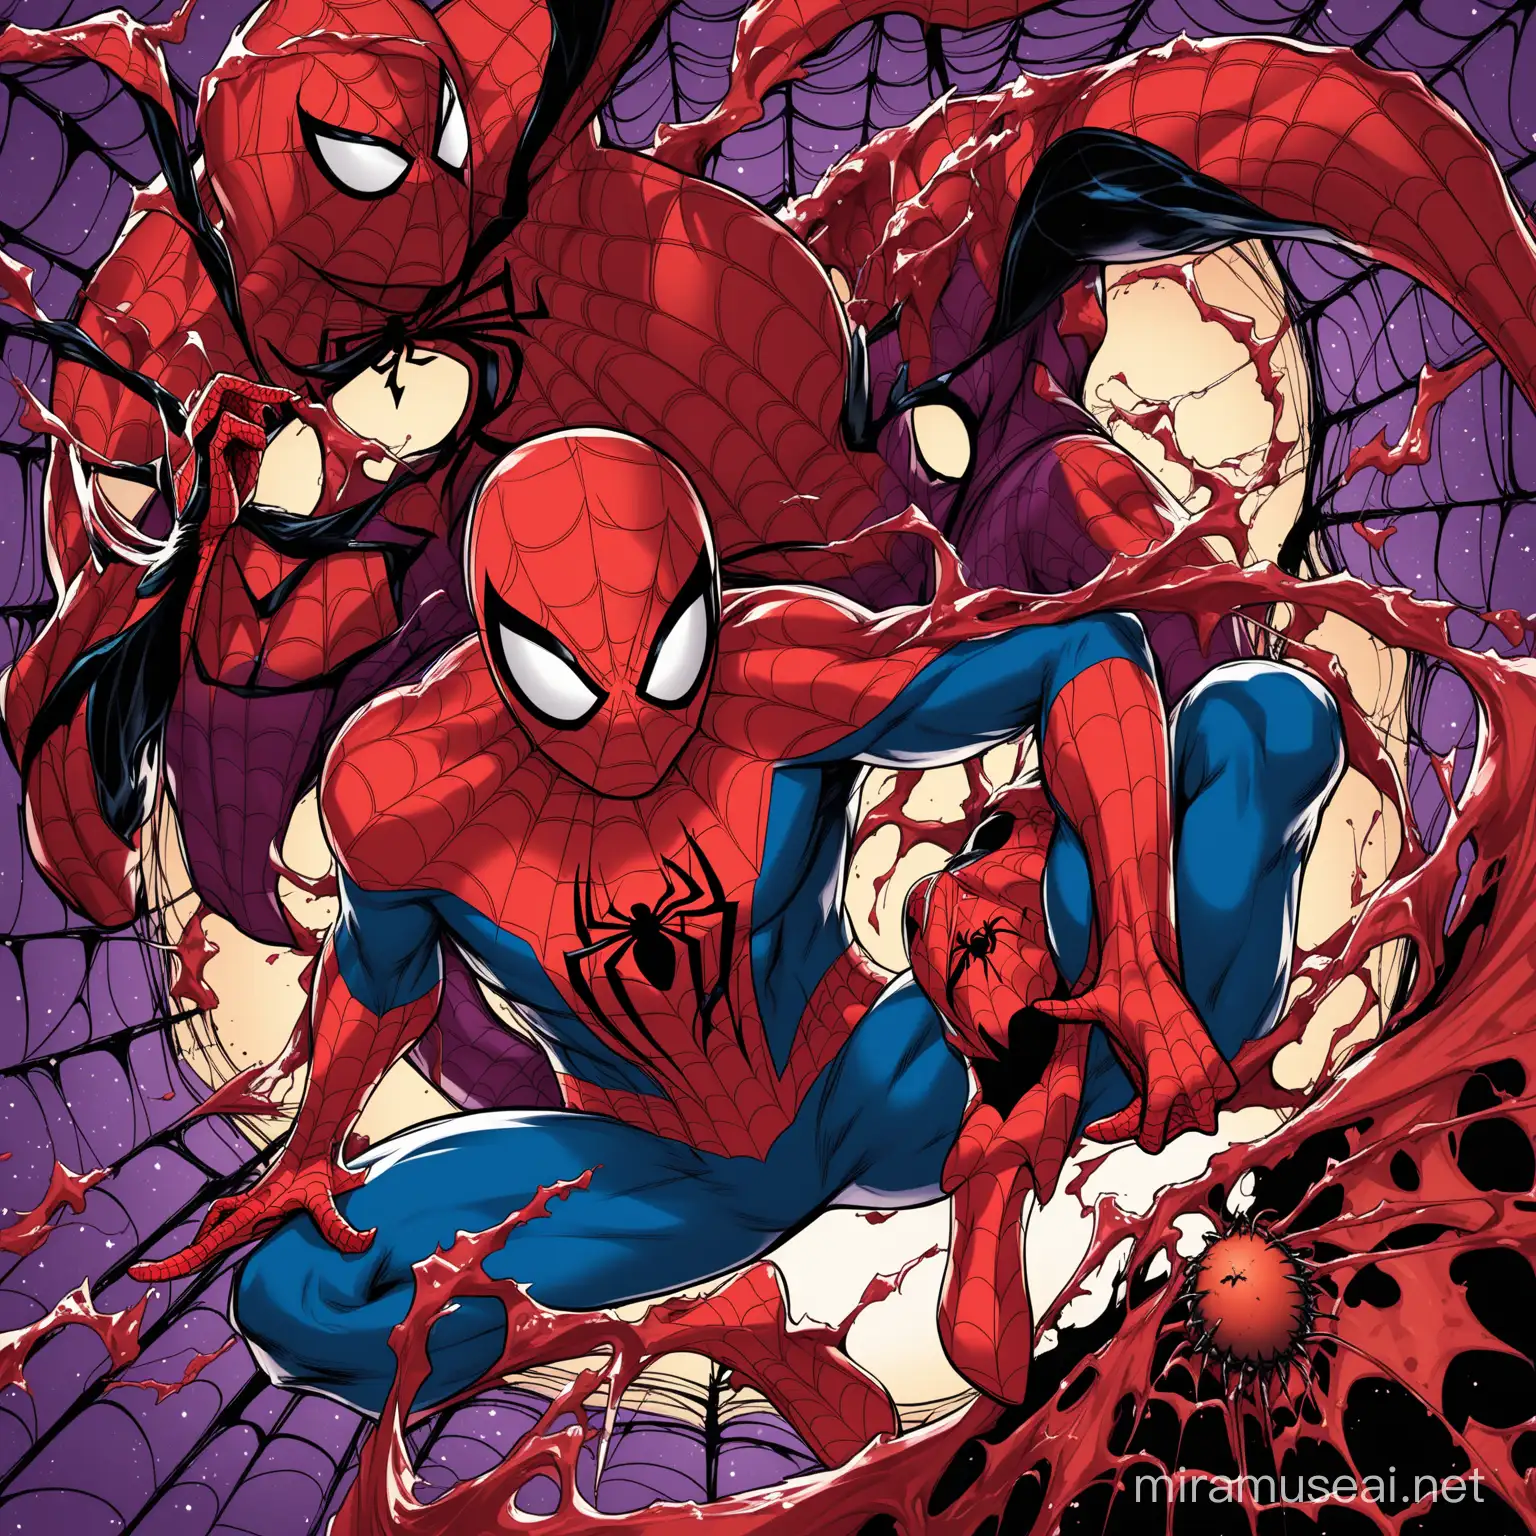 SpiderMan Confronts Venom and Carnage Across the Multiverse